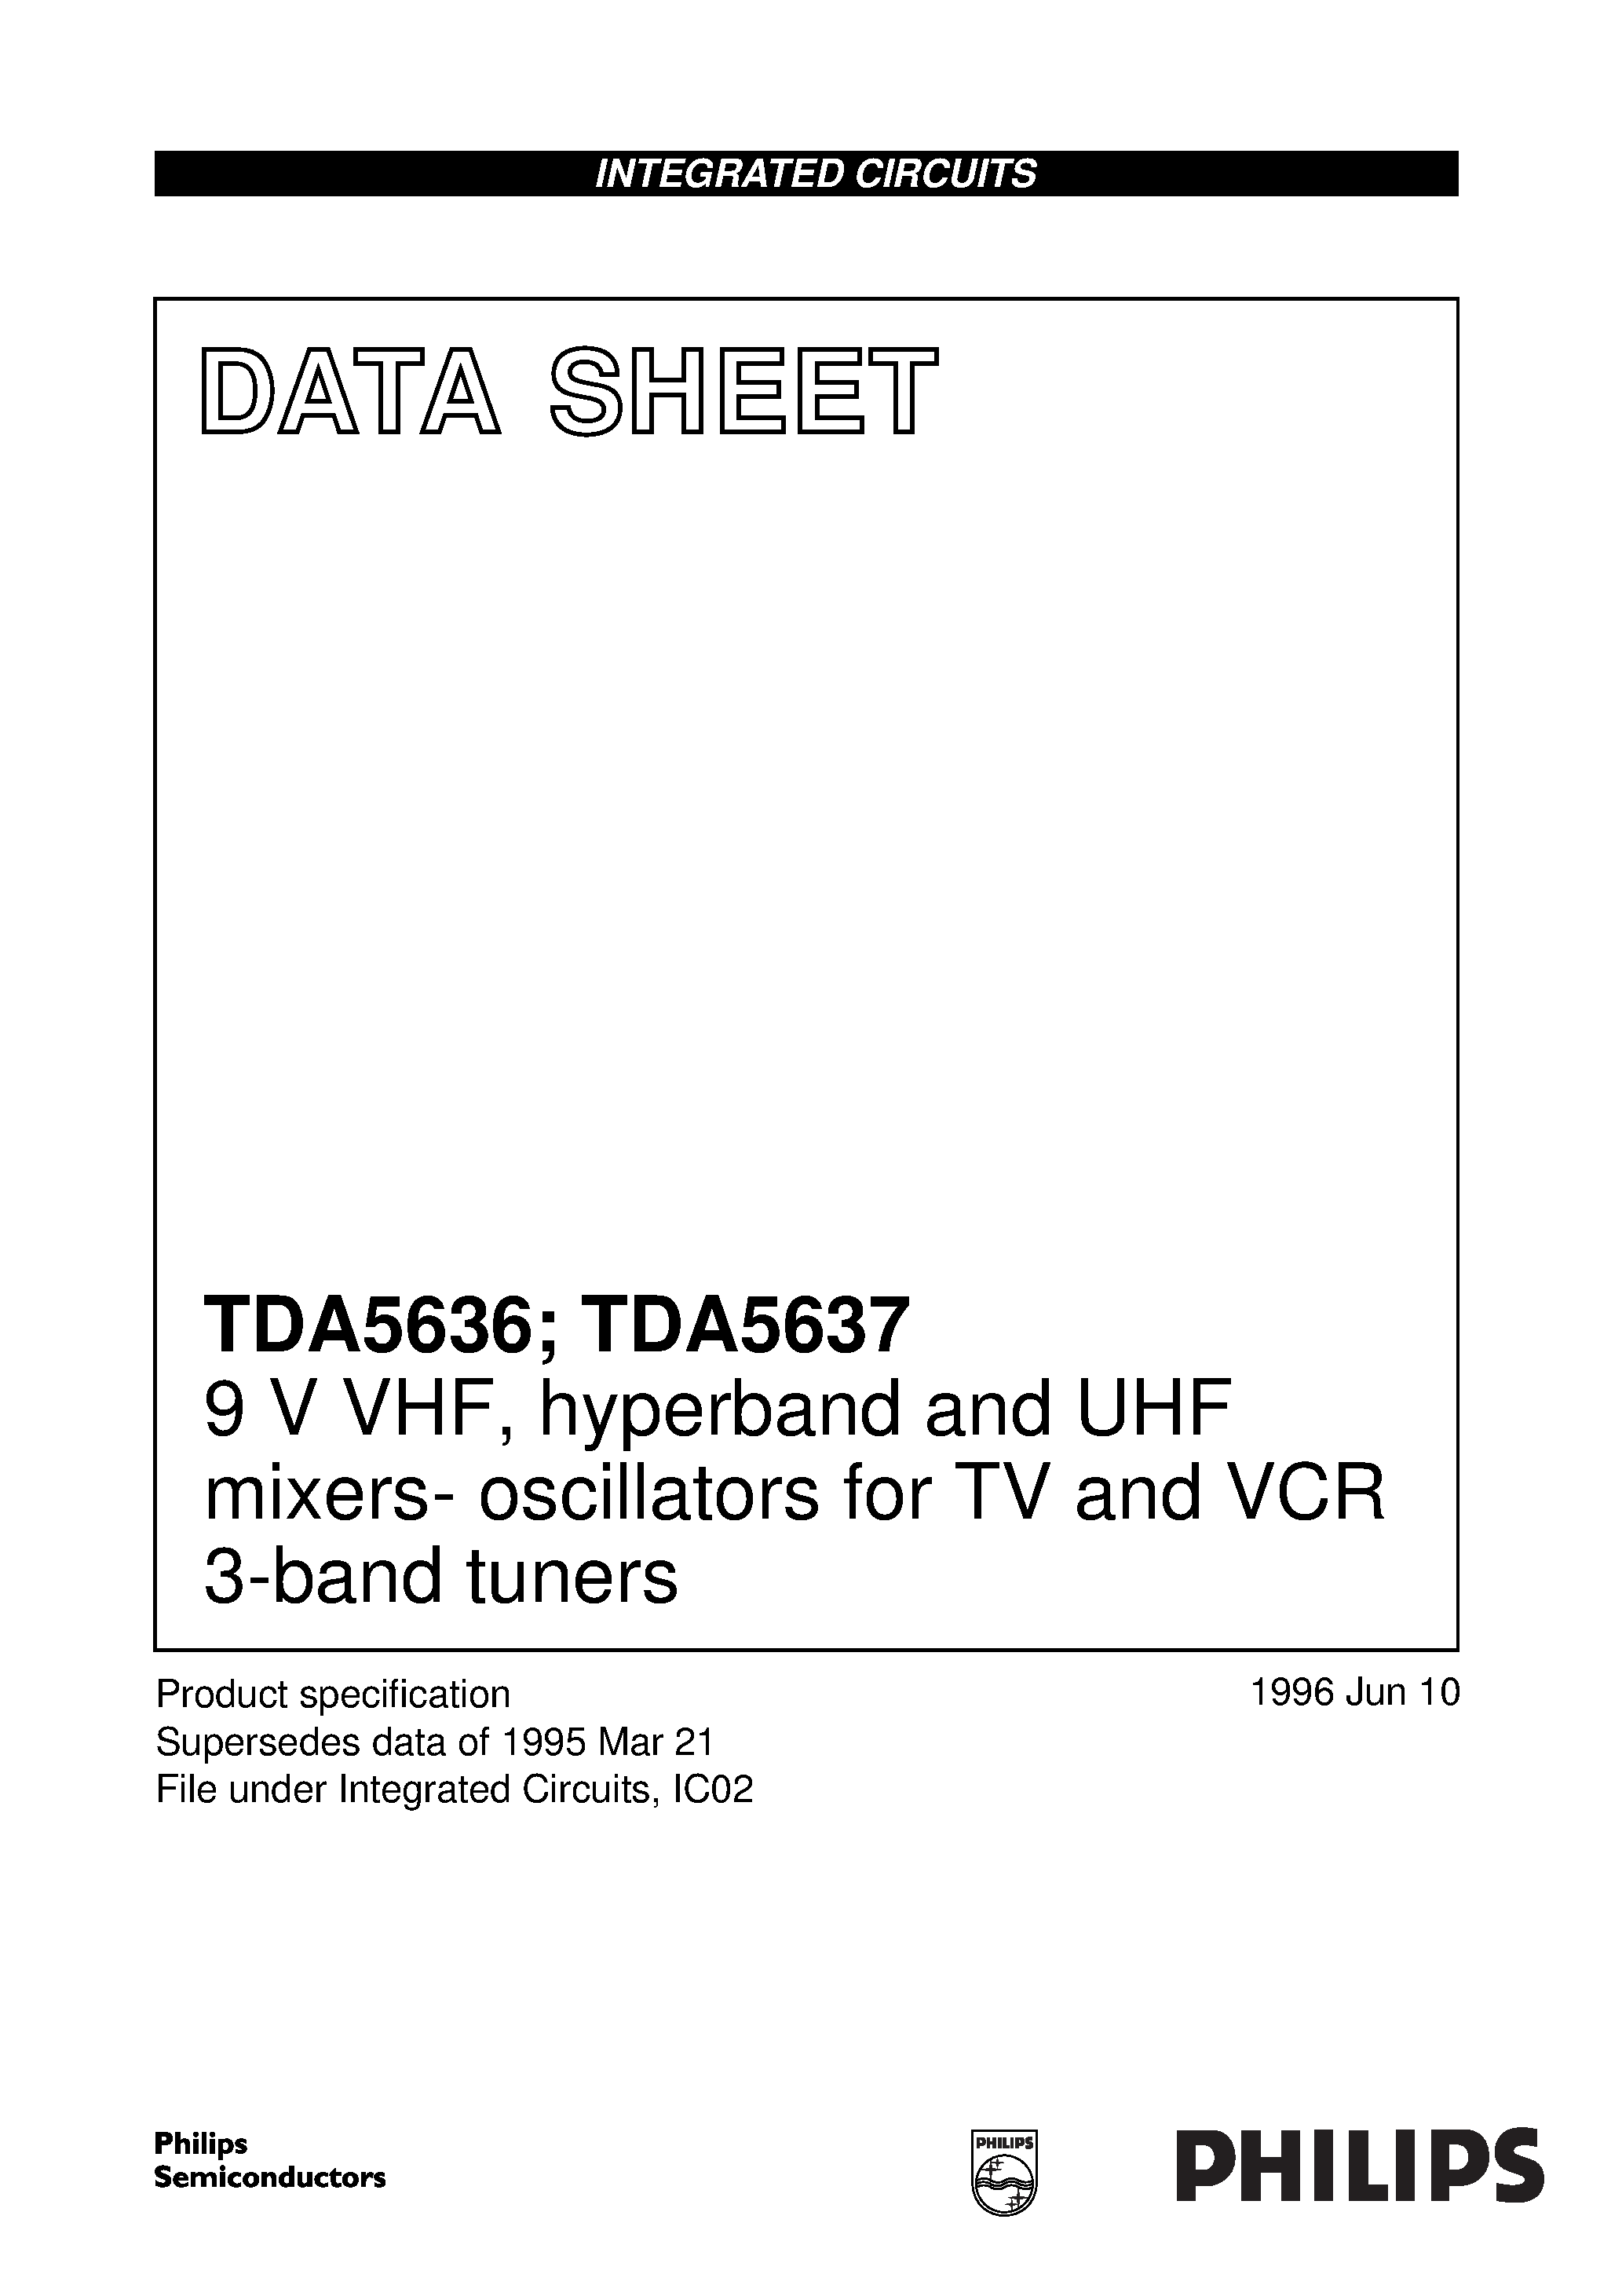 Даташит TDA5637T - 9 V VHF/ hyperband and UHF mixers- oscillators for TV and VCR 3-band tuners страница 1